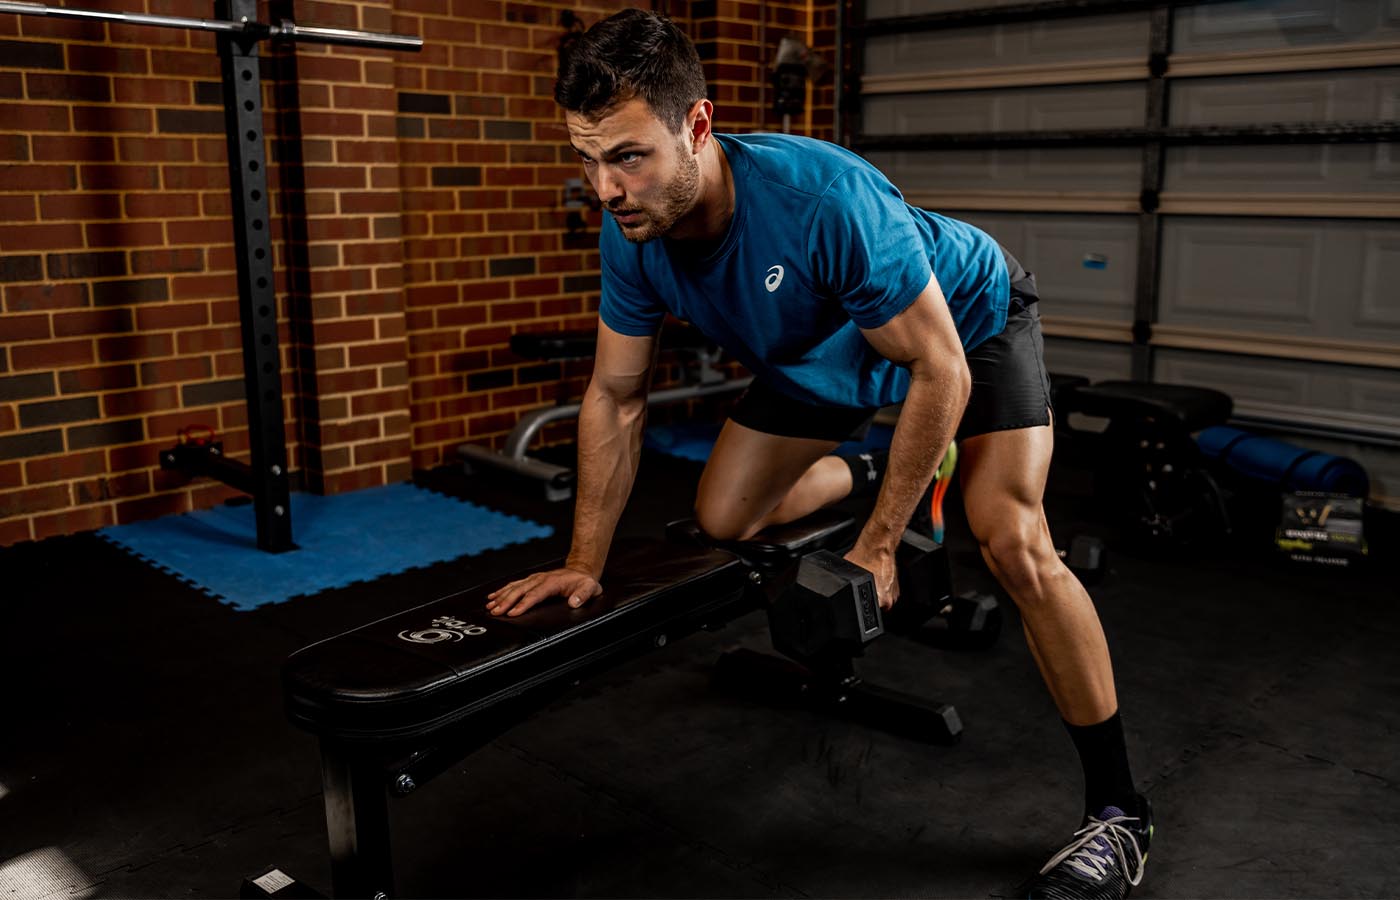 A male athlete doing a dumbbell row exercise for back strength